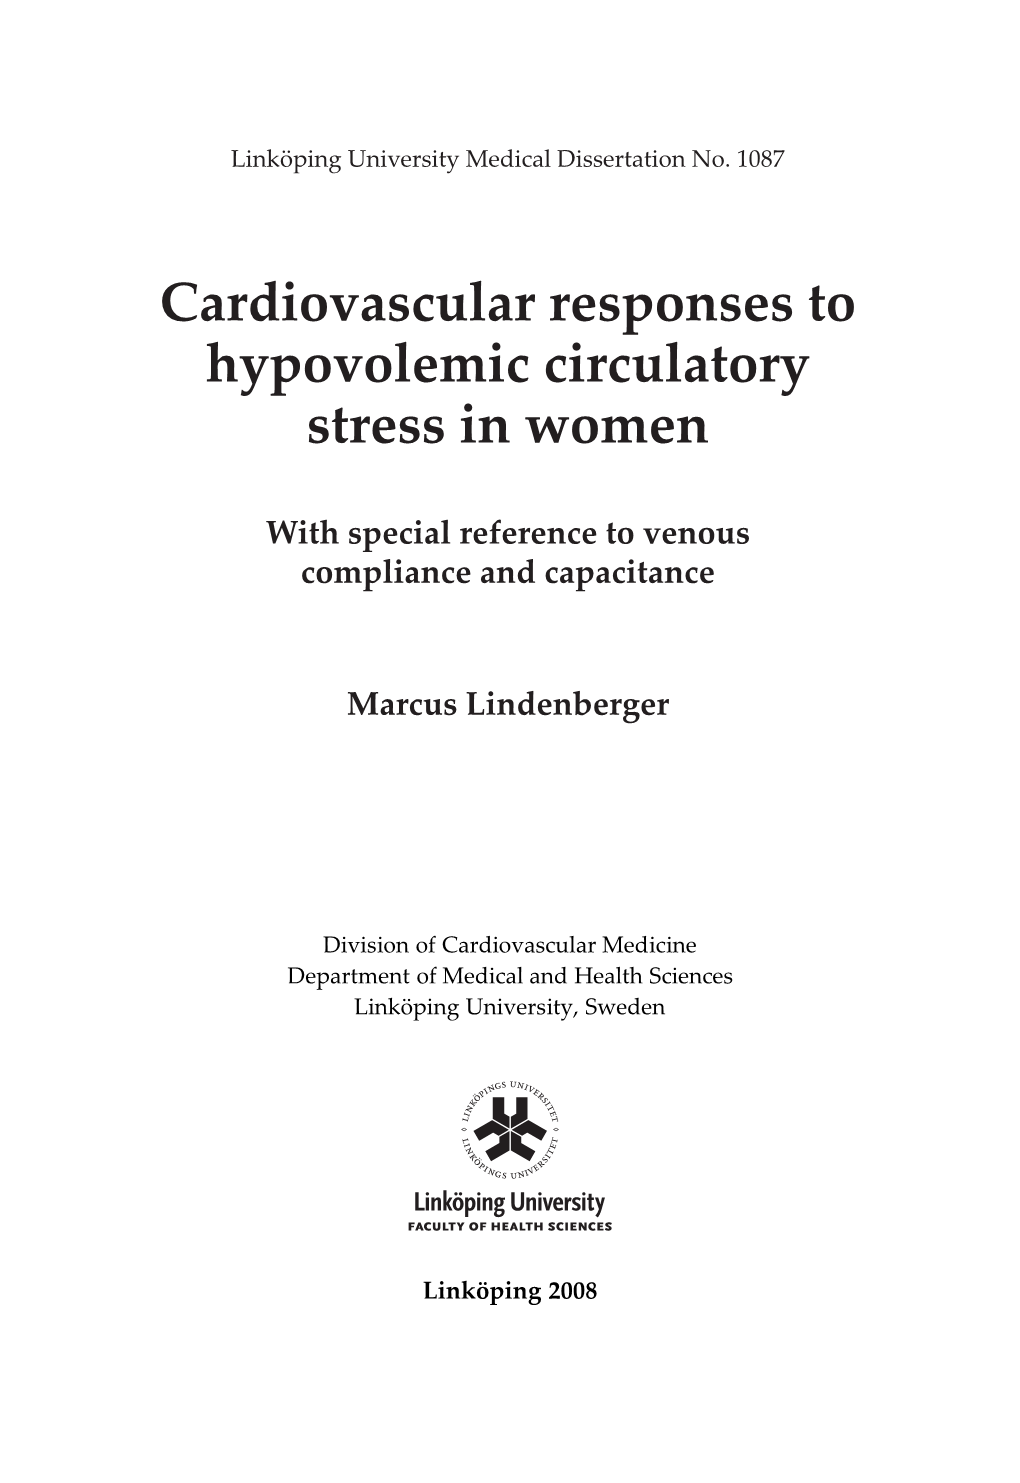 Cardiovascular Responses to Hypovolemic Circulatory Stress in Women